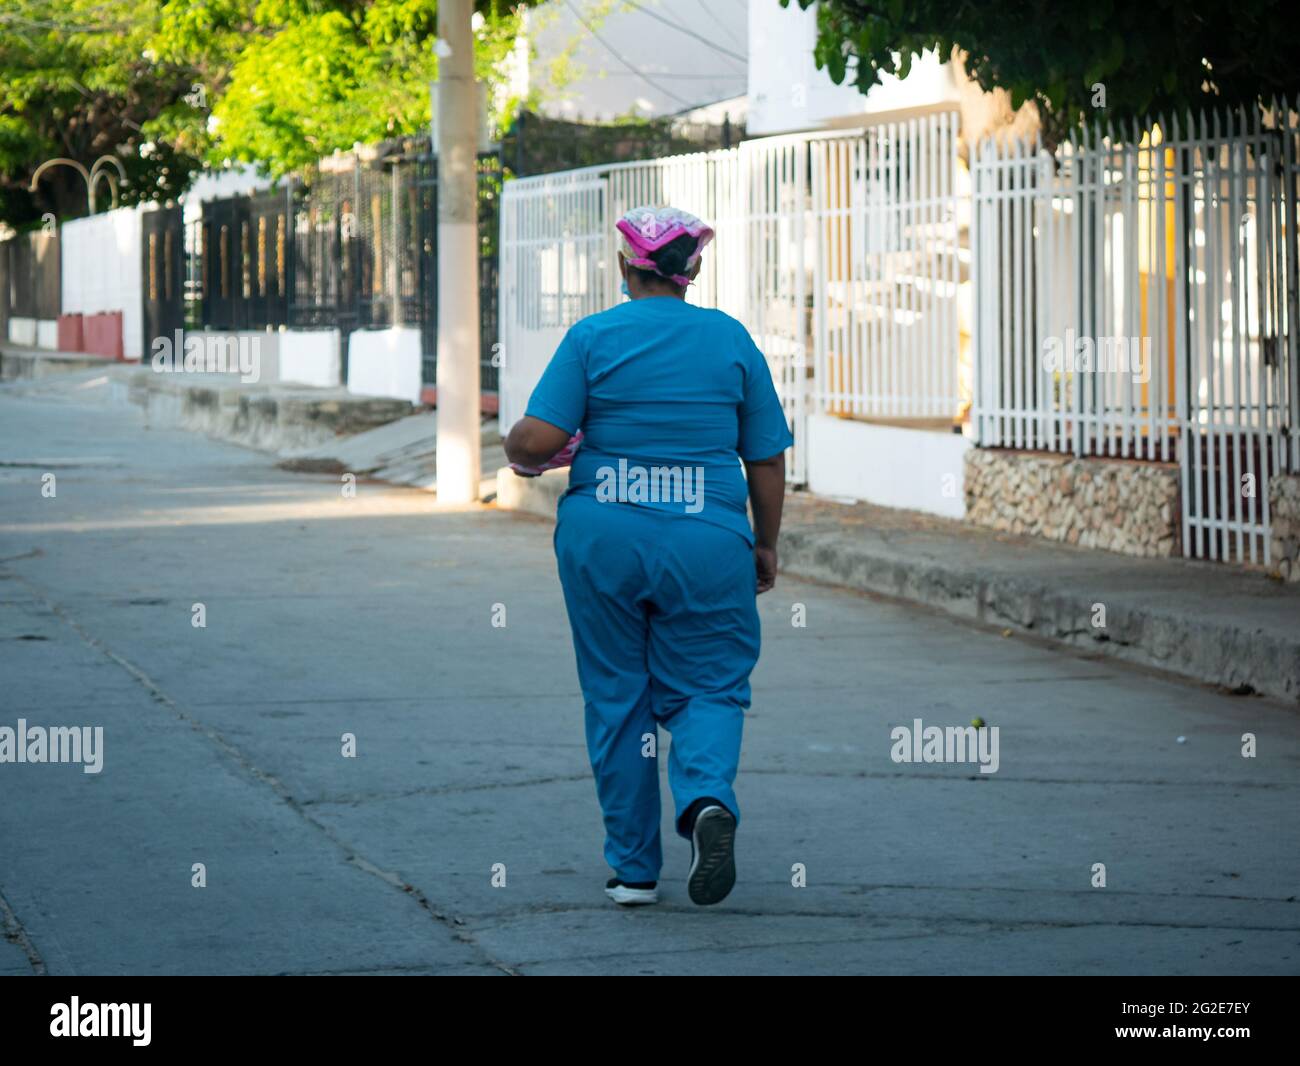 Santa Marta, Magdalena, Colombia - May 22 2021: Latin Woman Dressed in Light Blue with a Headscarf Walks in the Middle of the Street Early in the Morn Stock Photo